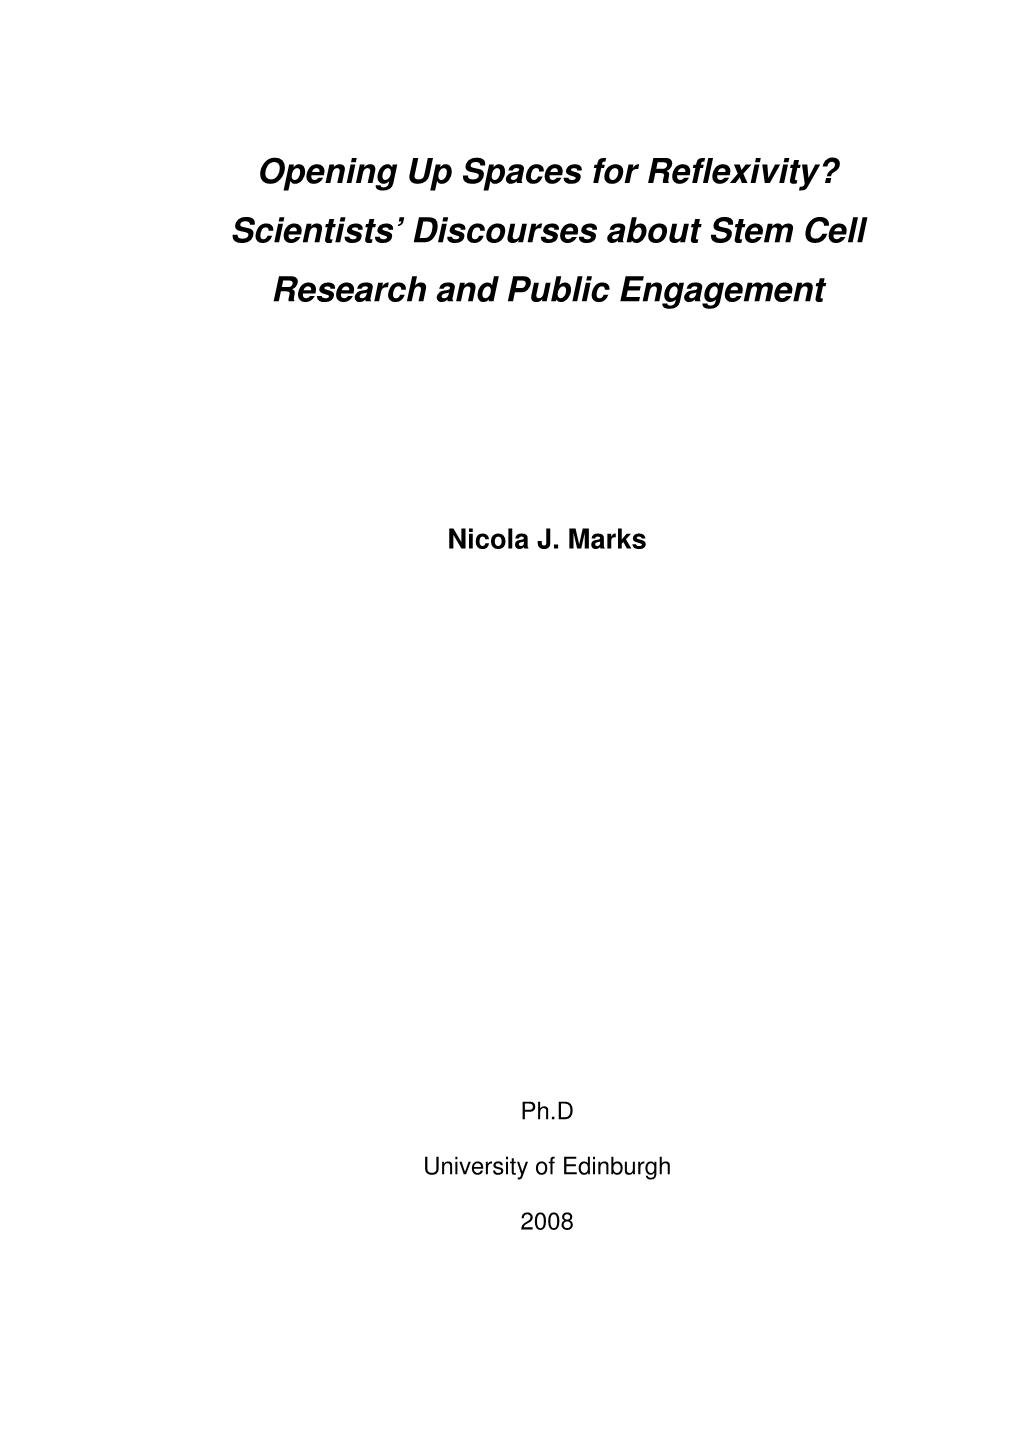 Opening up Spaces for Reflexivity? Scientists' Discourses About Stem Cell Research and Public Engagement